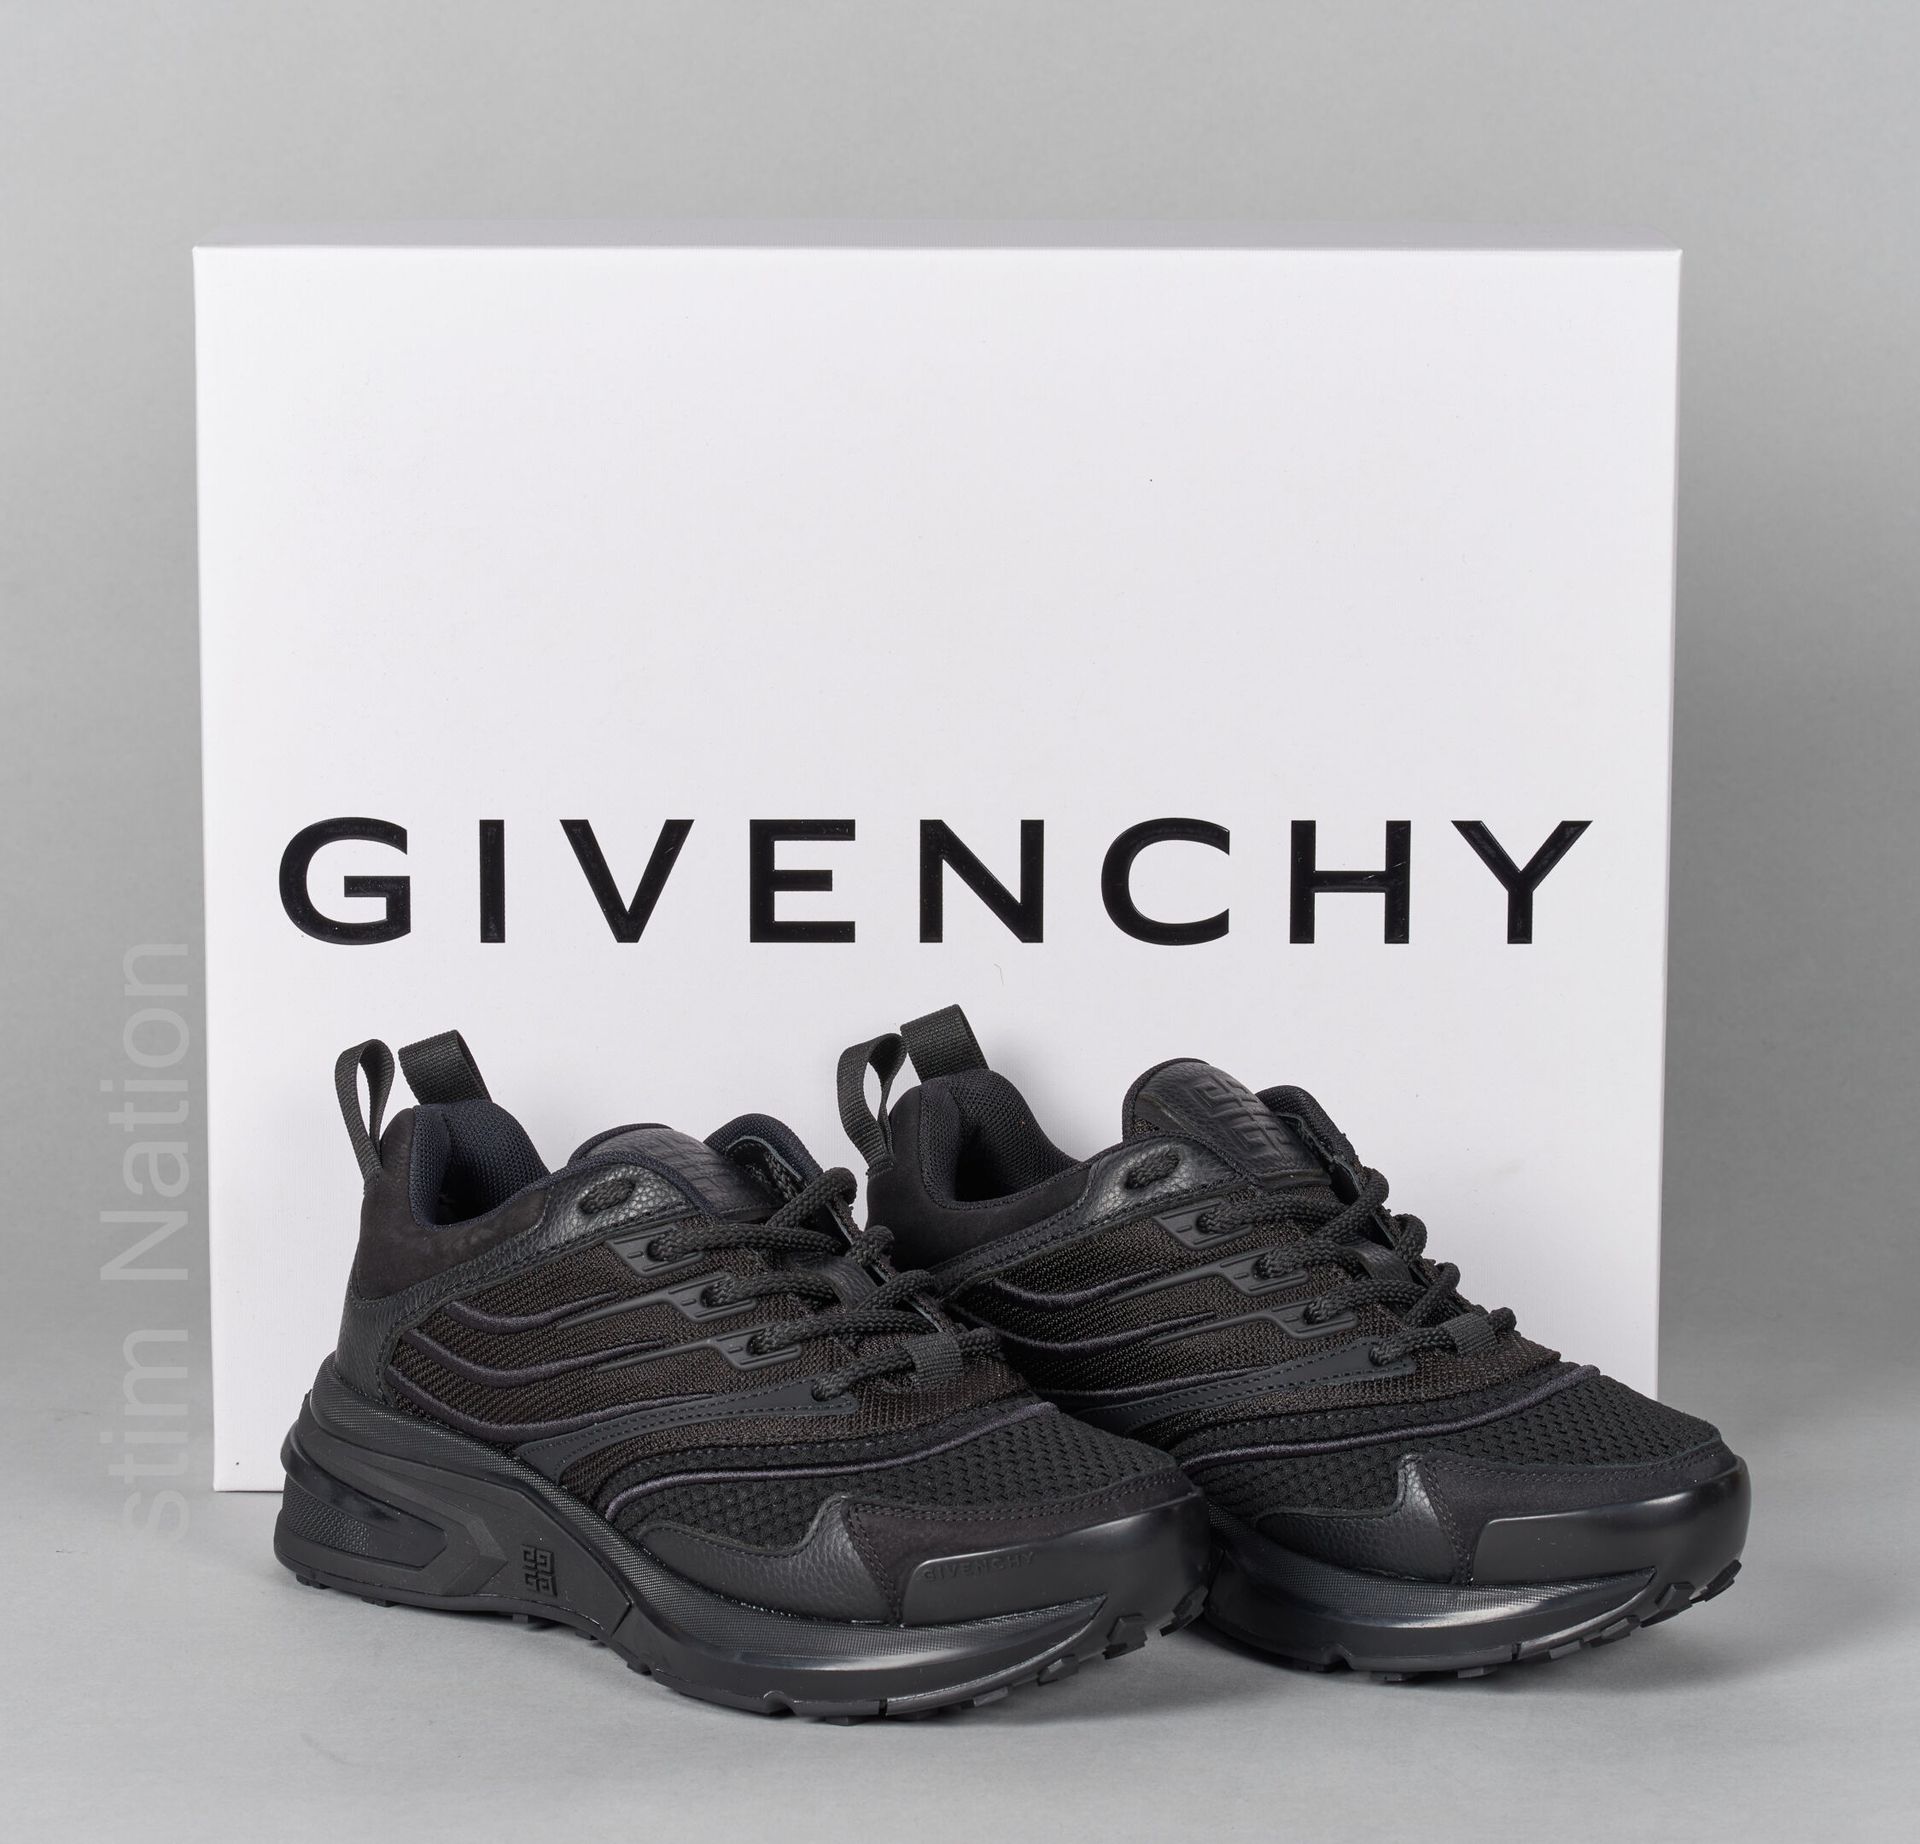 GIVENCHY PAIR OF SNEAKERS in grained leather, mesh and black composite (P 35, ef&hellip;